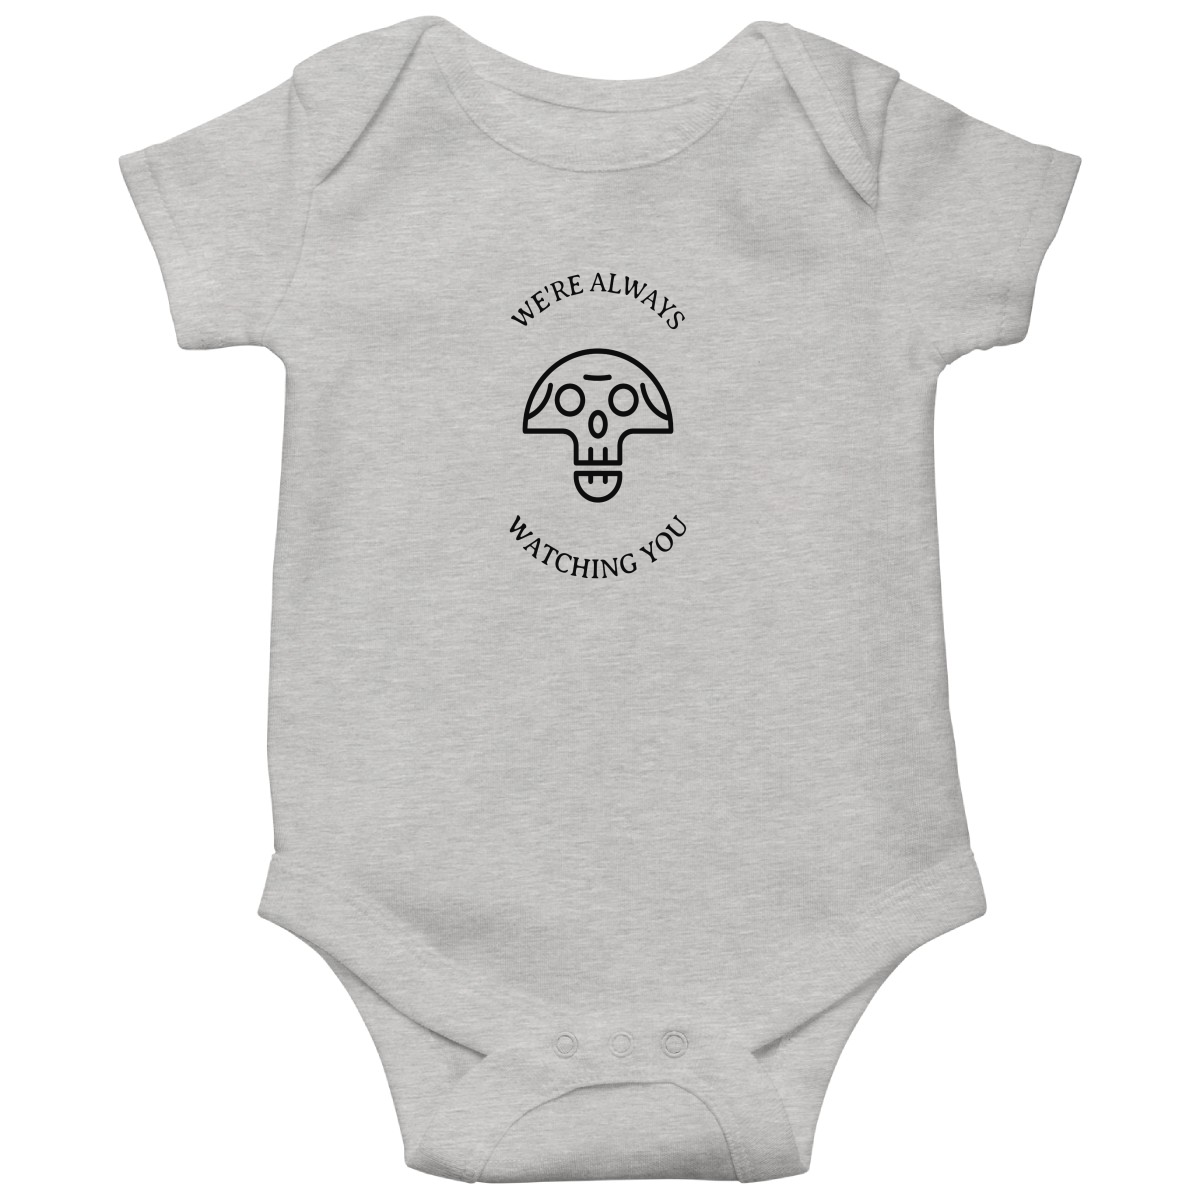 We're Always Watching You Baby Bodysuits | Gray